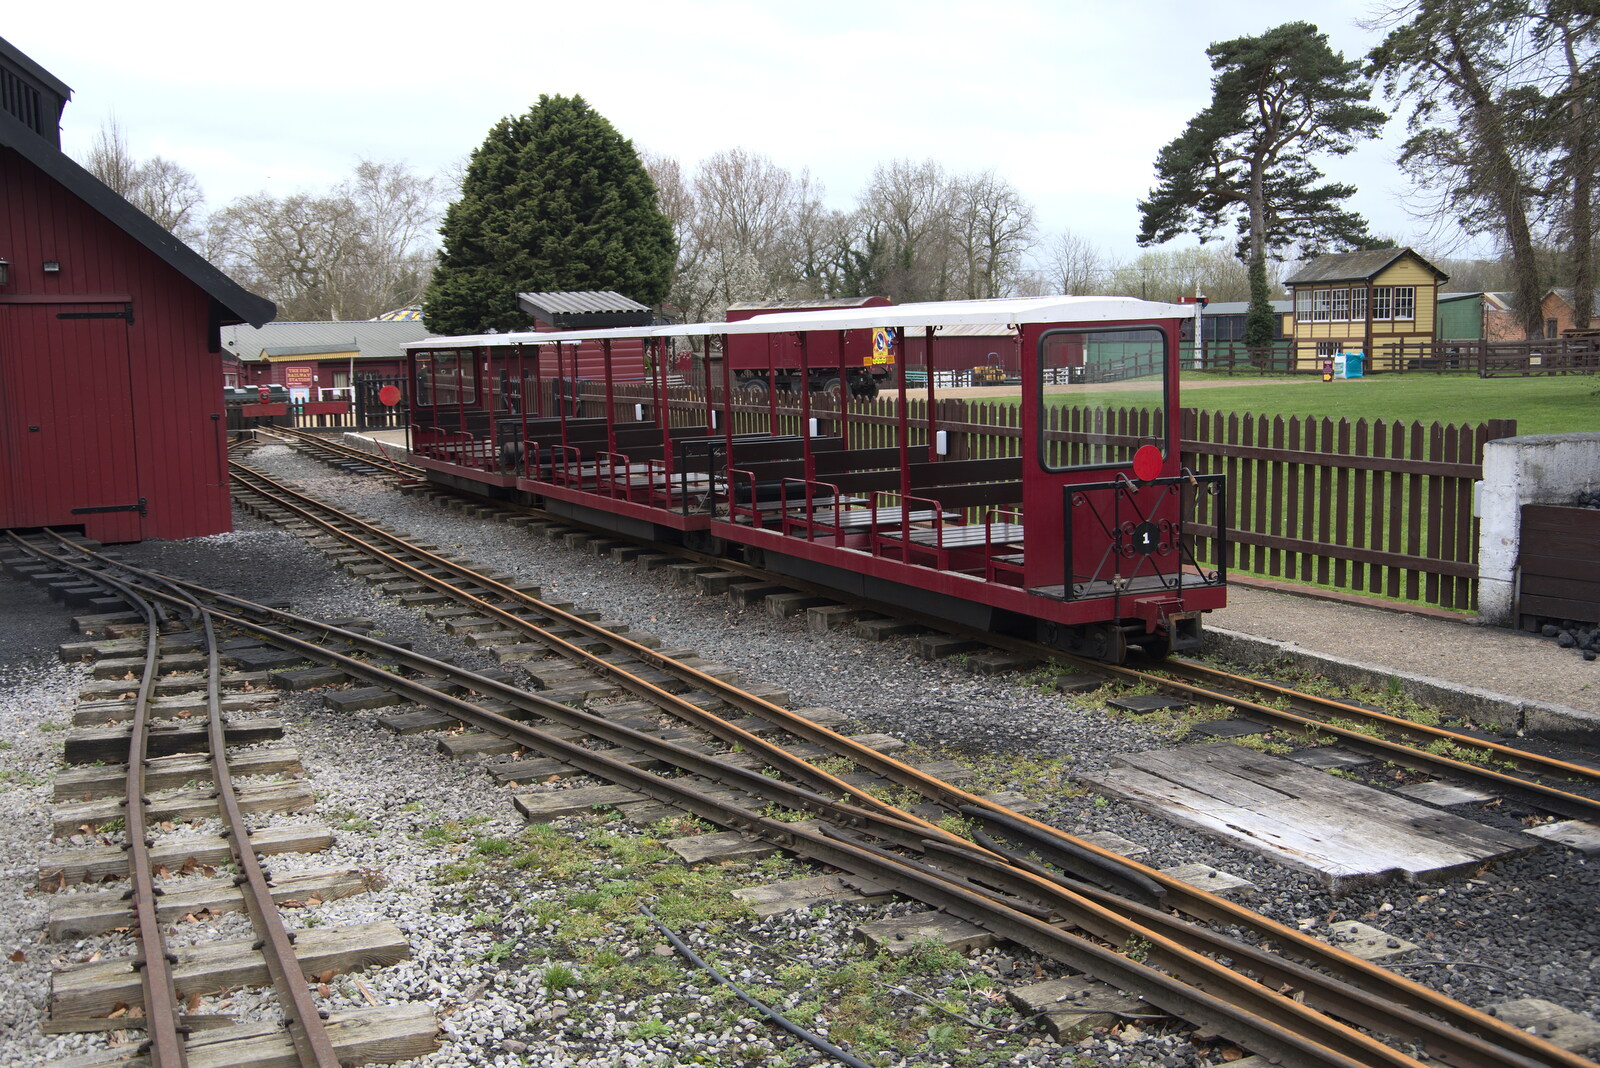 The train rides are silent from A Return to Bressingham Steam and Gardens, Bressingham, Norfolk - 28th March 2021